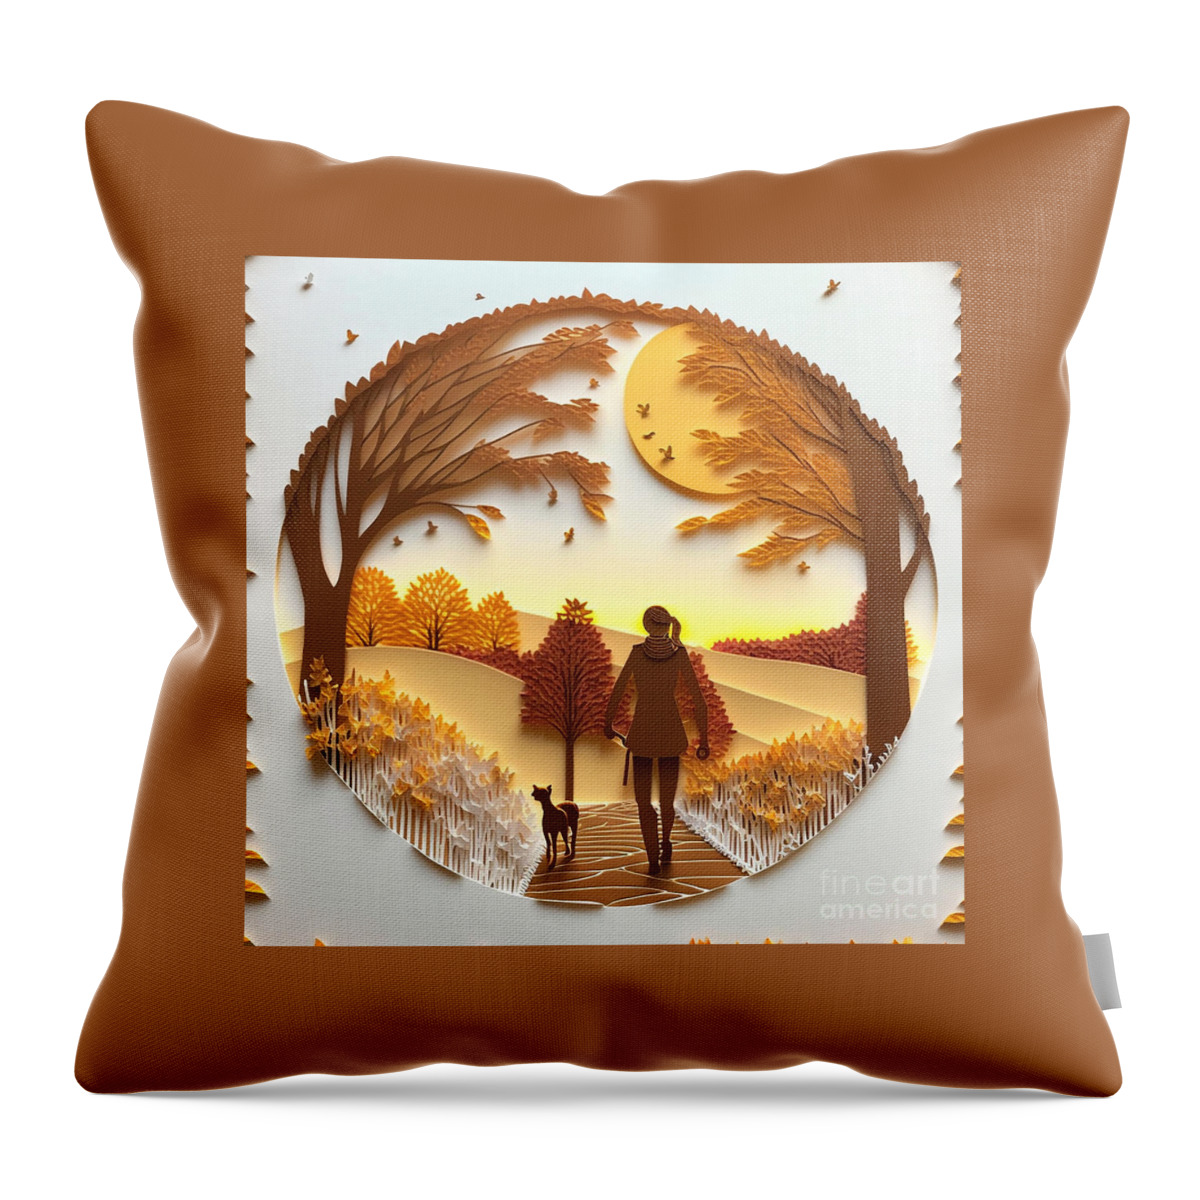 Morning Walk - Quilling Throw Pillow featuring the mixed media Morning Walk - Quilling #1 by Jay Schankman